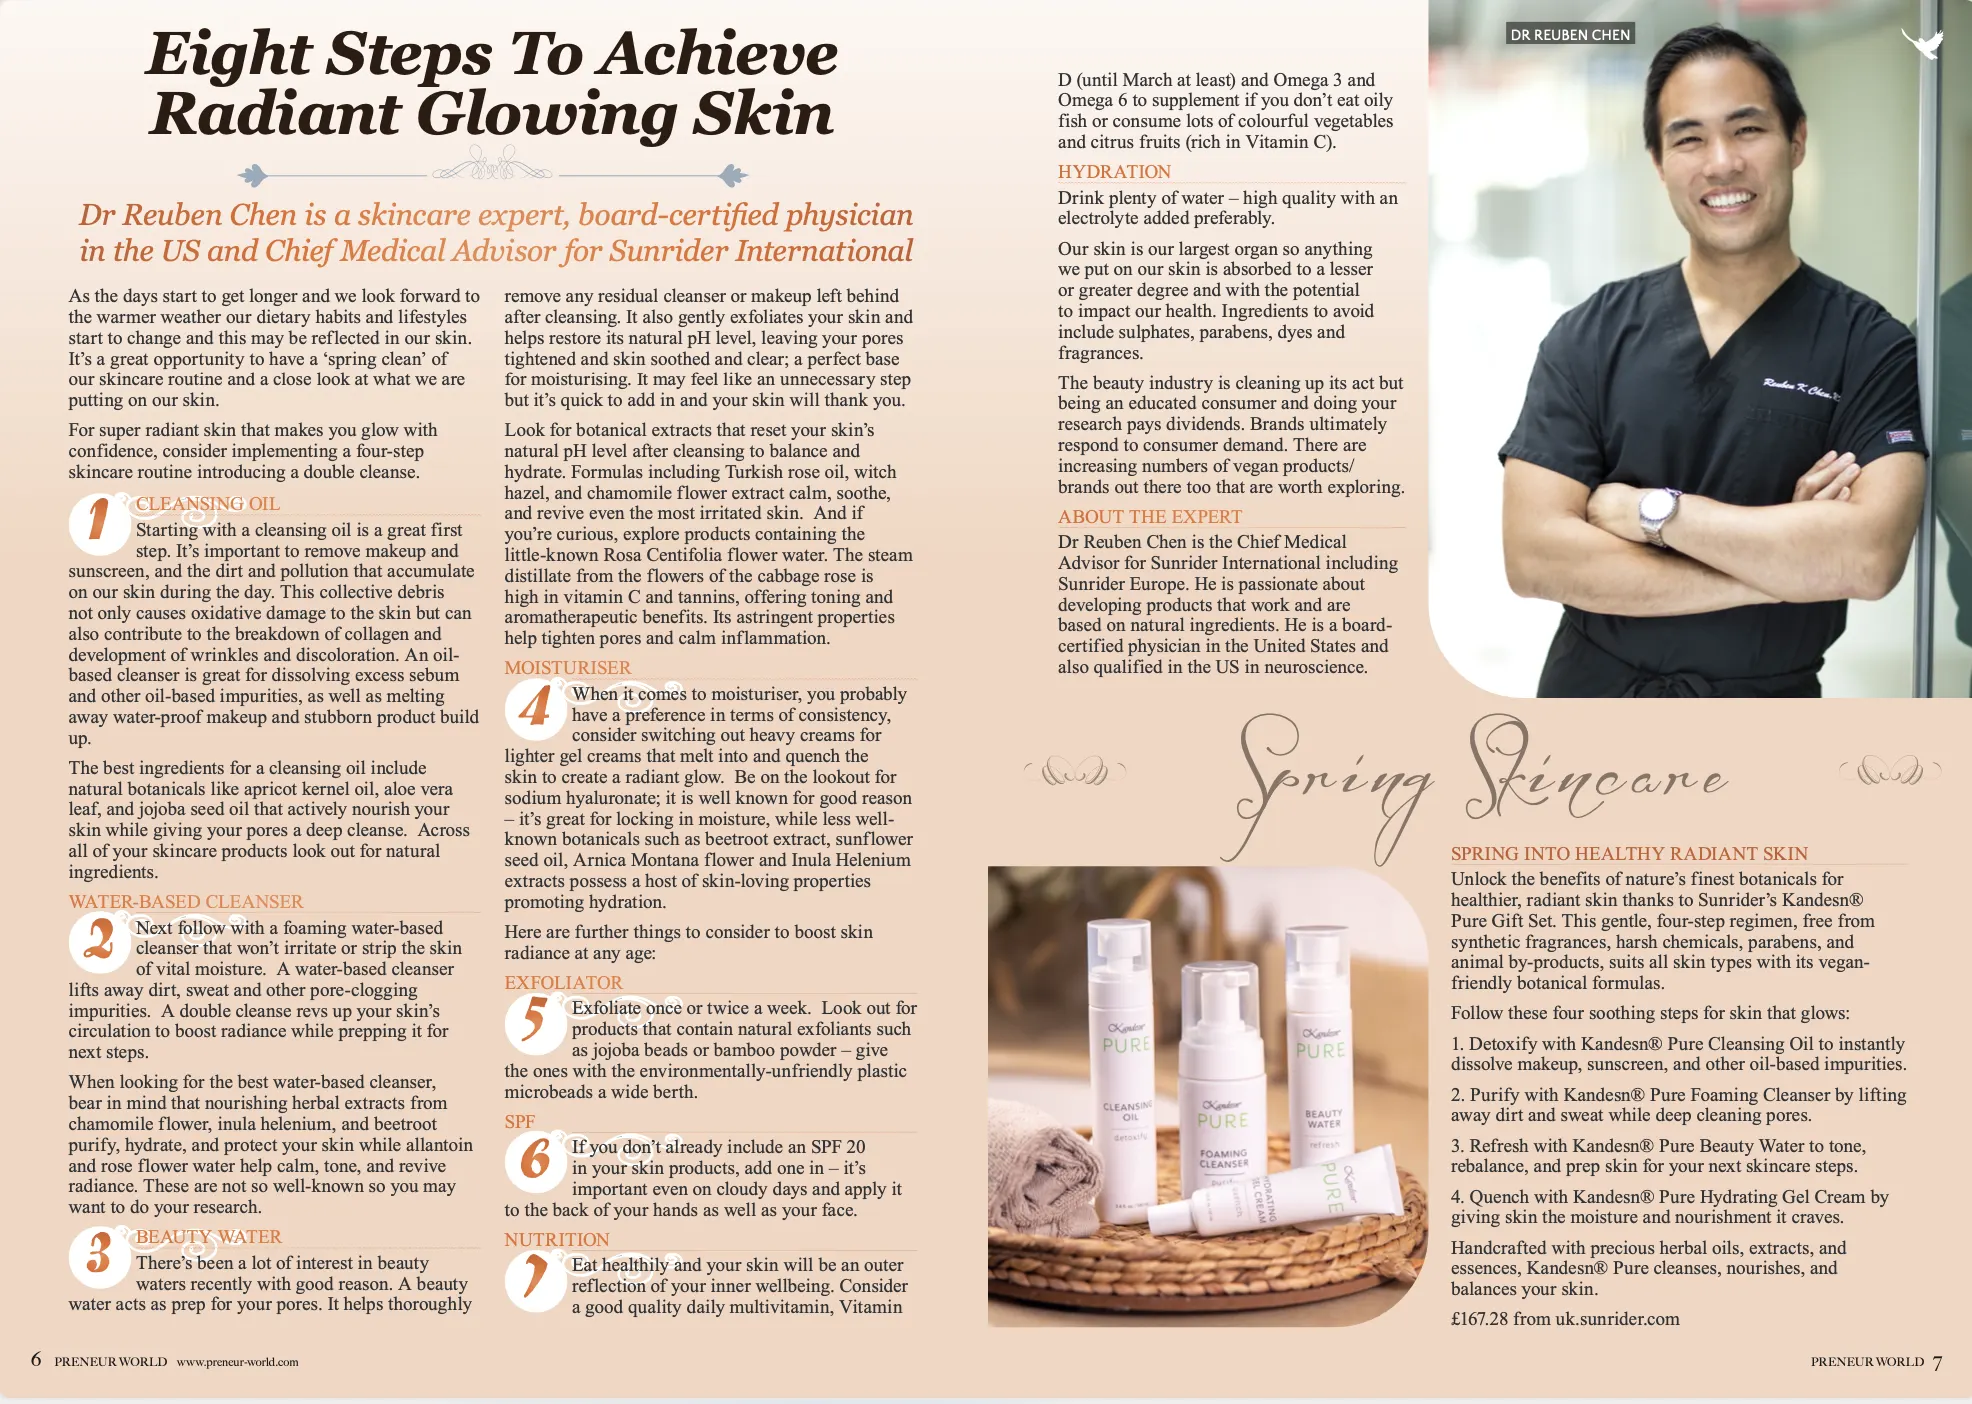 Spring into Radiant Skin: Dr. Reuben Chen's Insights Featured in Preneur World 1